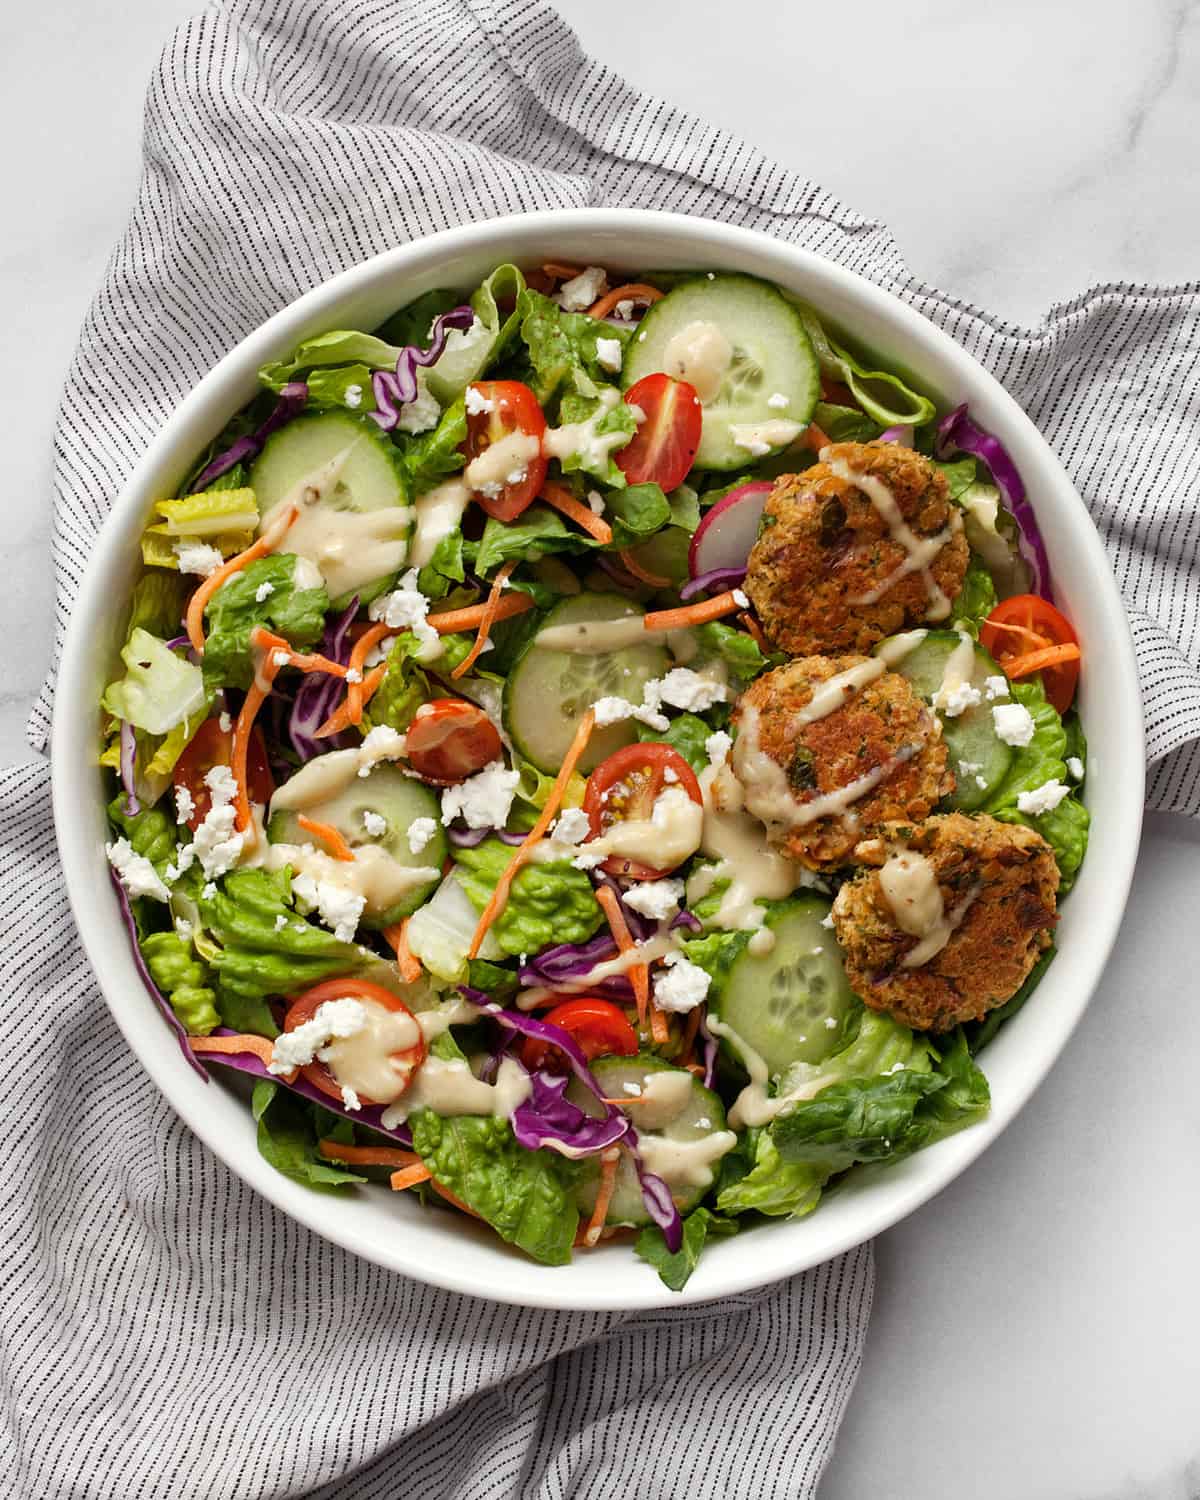 Salad with baked falafel in a bowl.